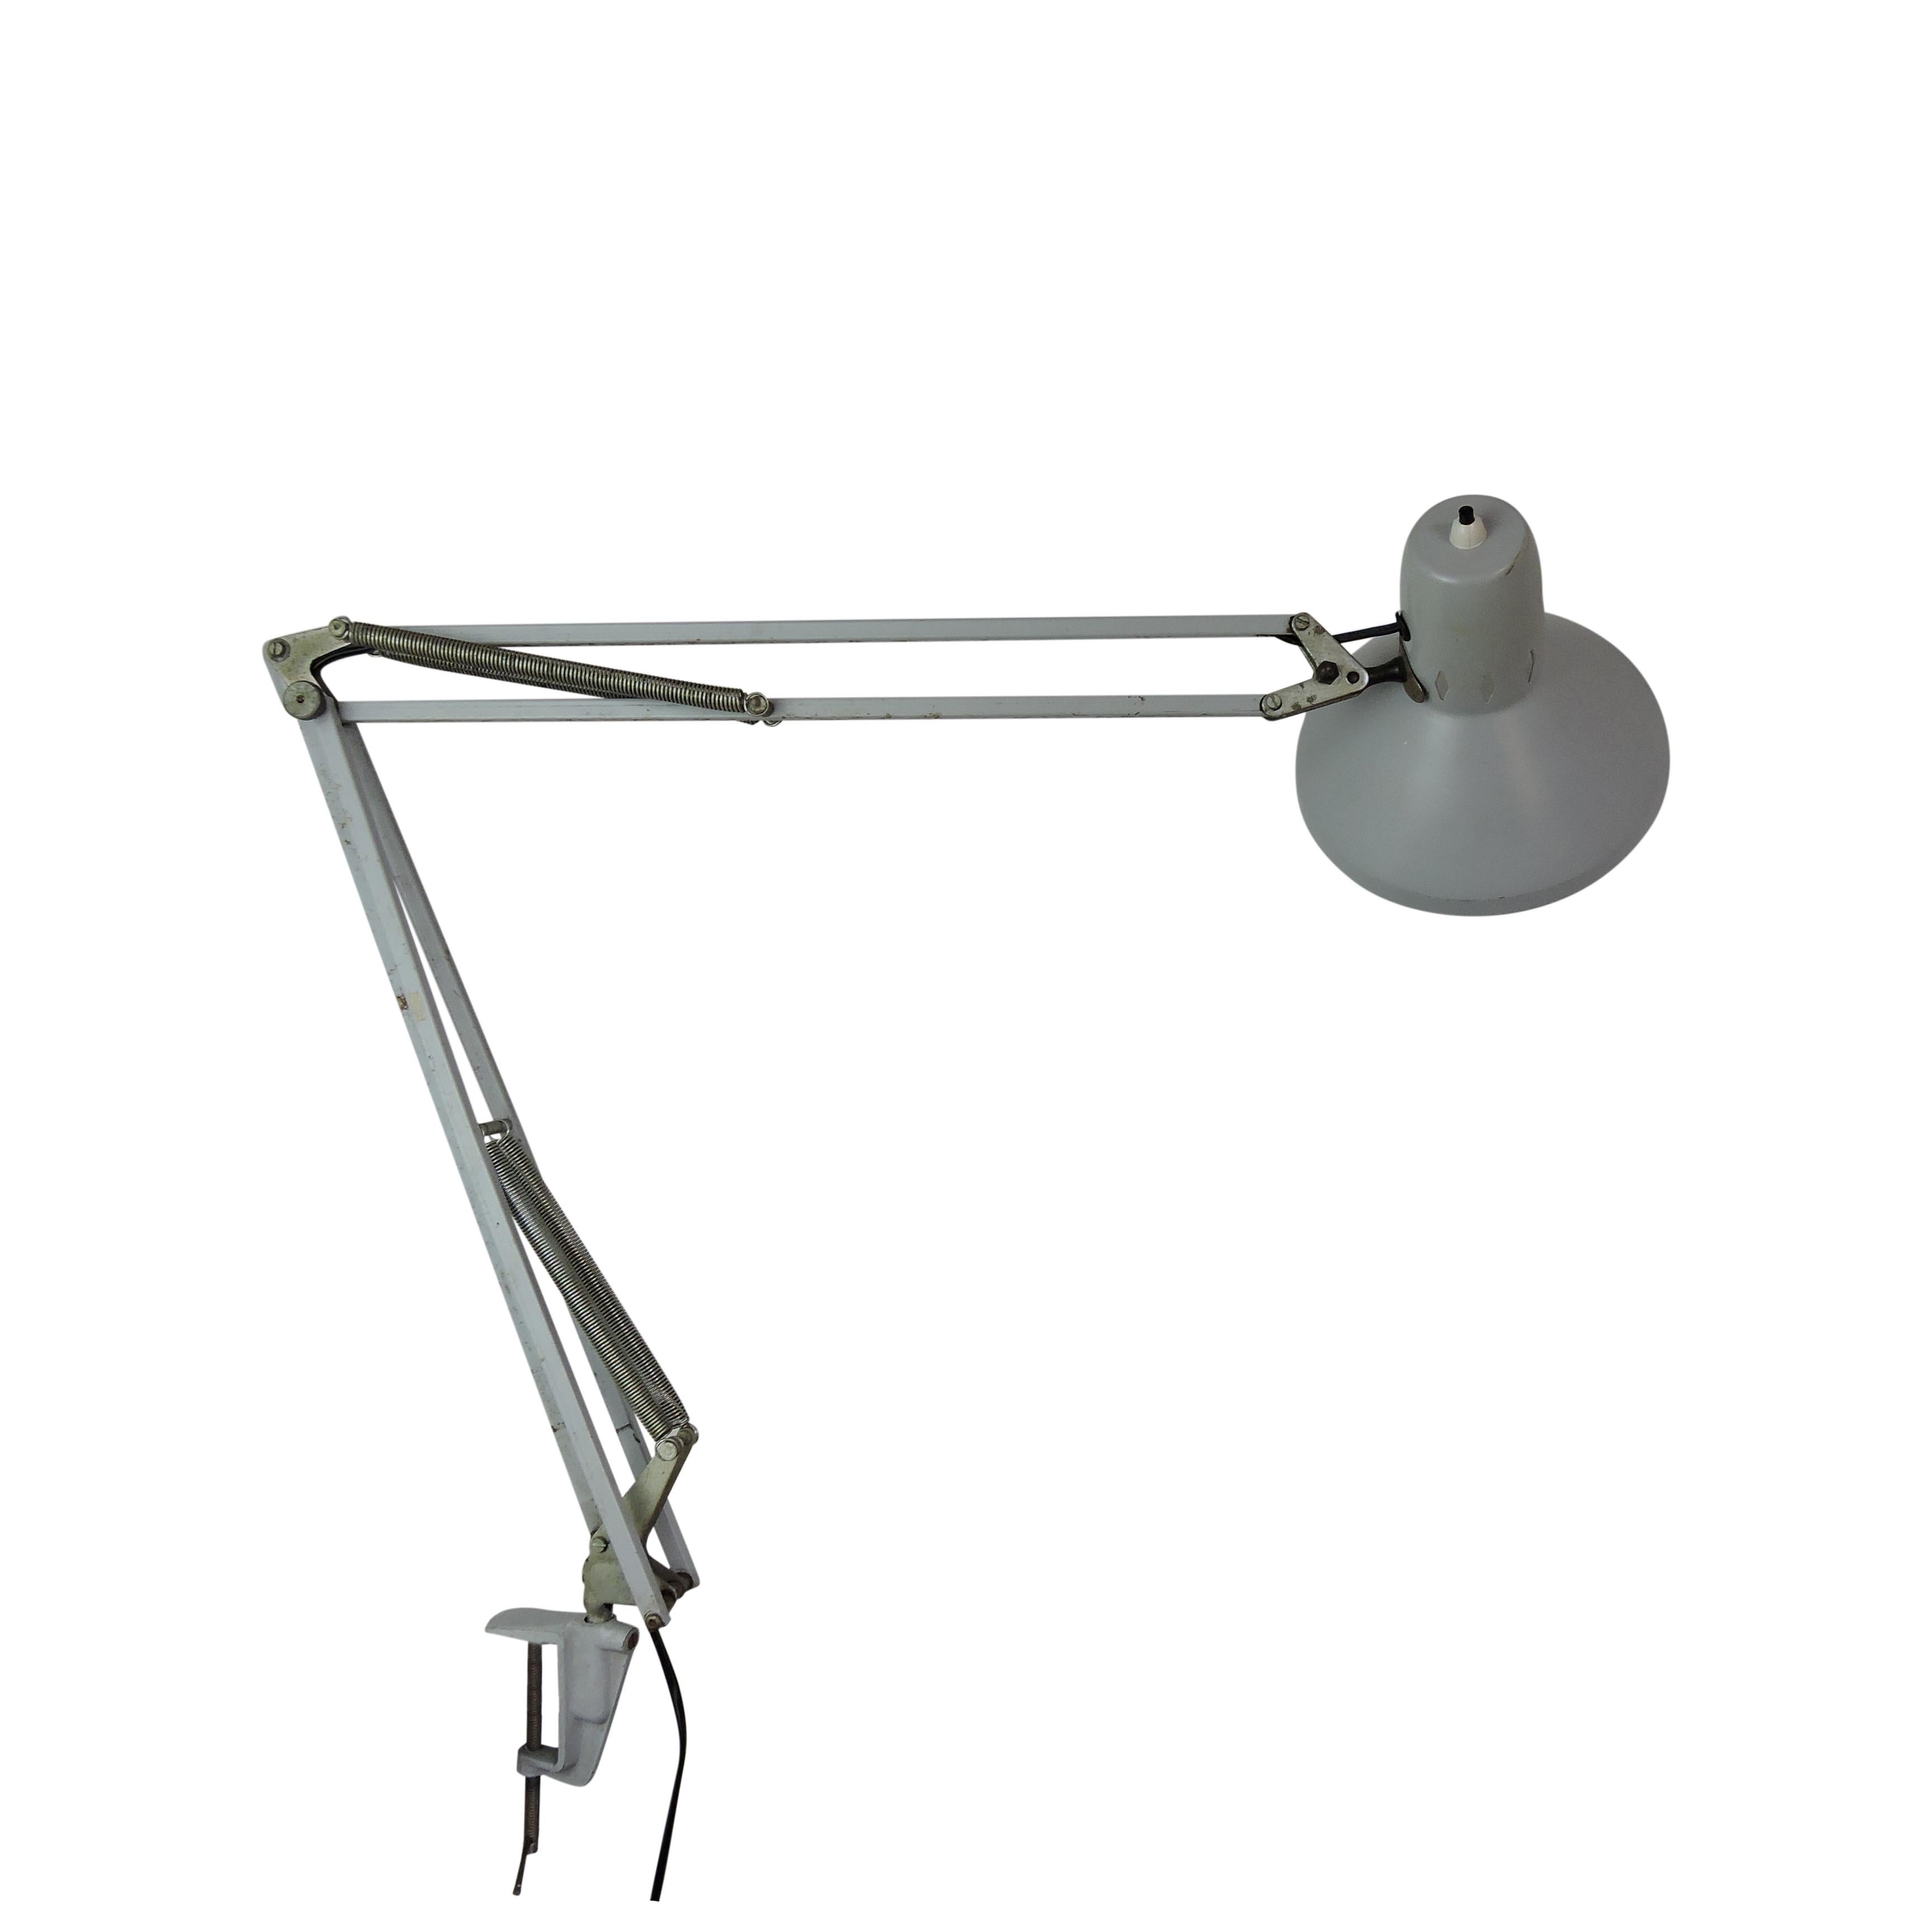 This grey lamp from the 1960s can be fixed to a desk or shelf using a vice.